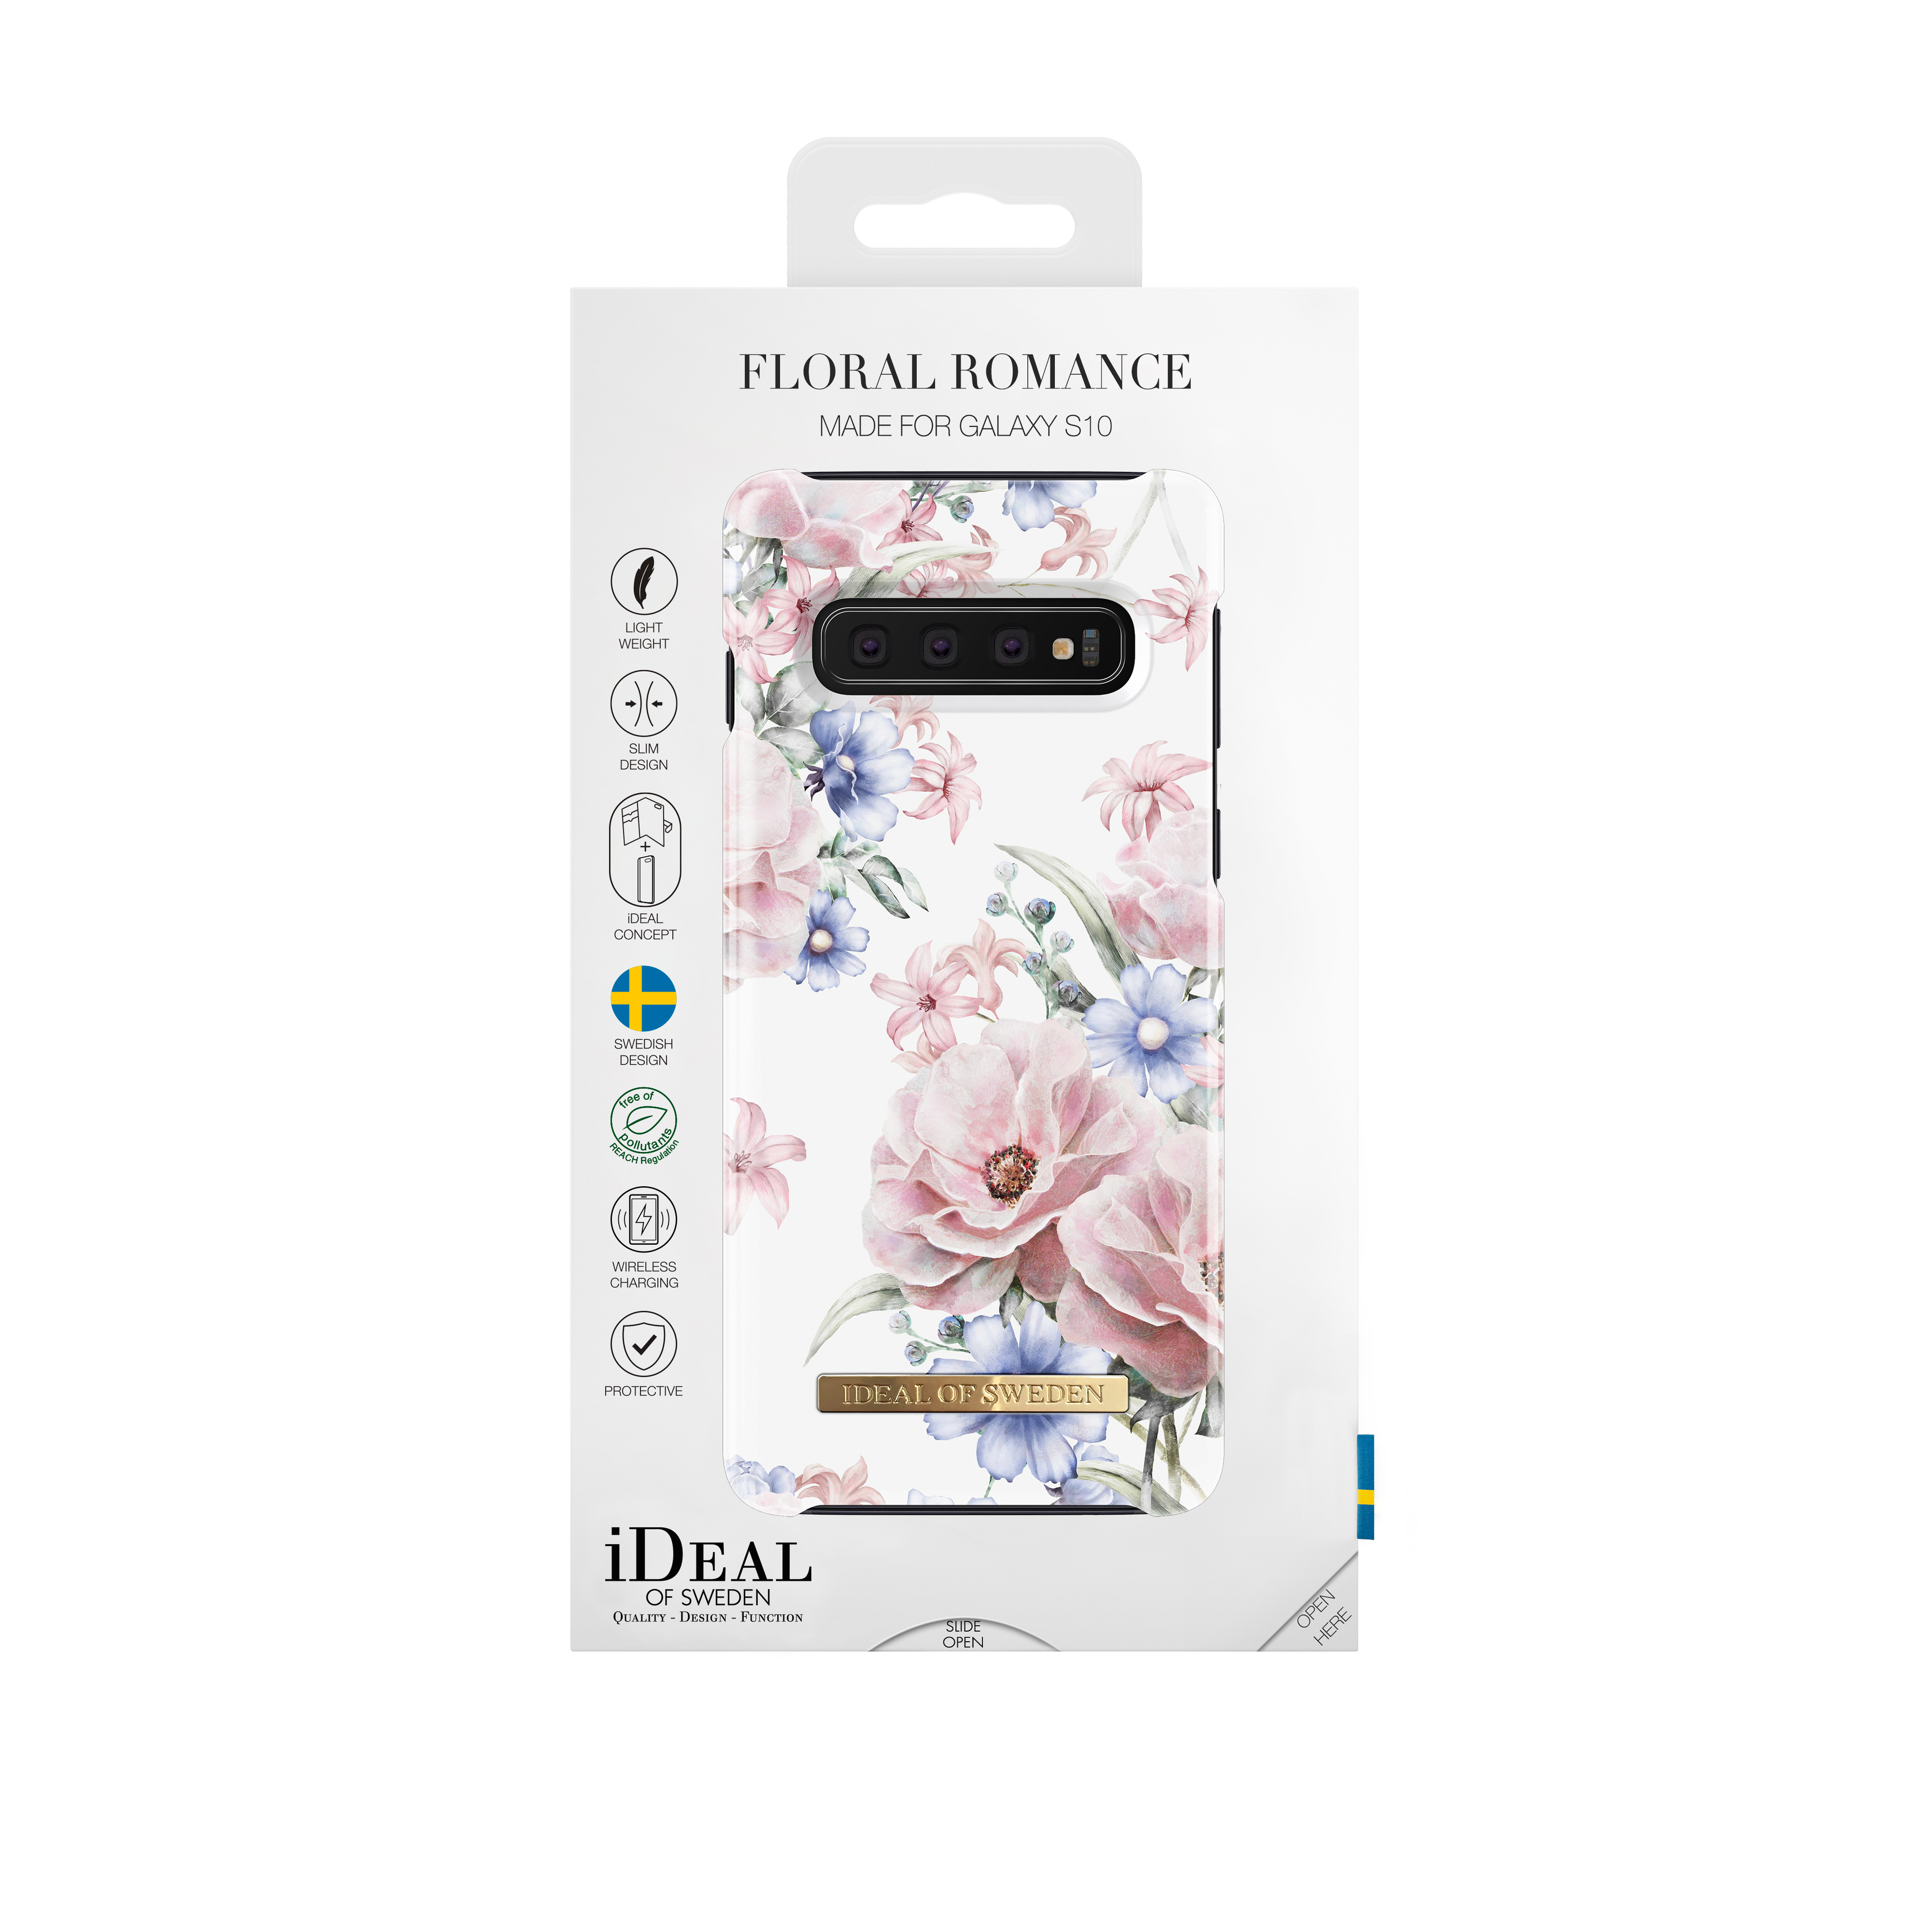 IDEAL Backcover, OF Galaxy S10, Samsung, SWEDEN Floral Romance Fashion,